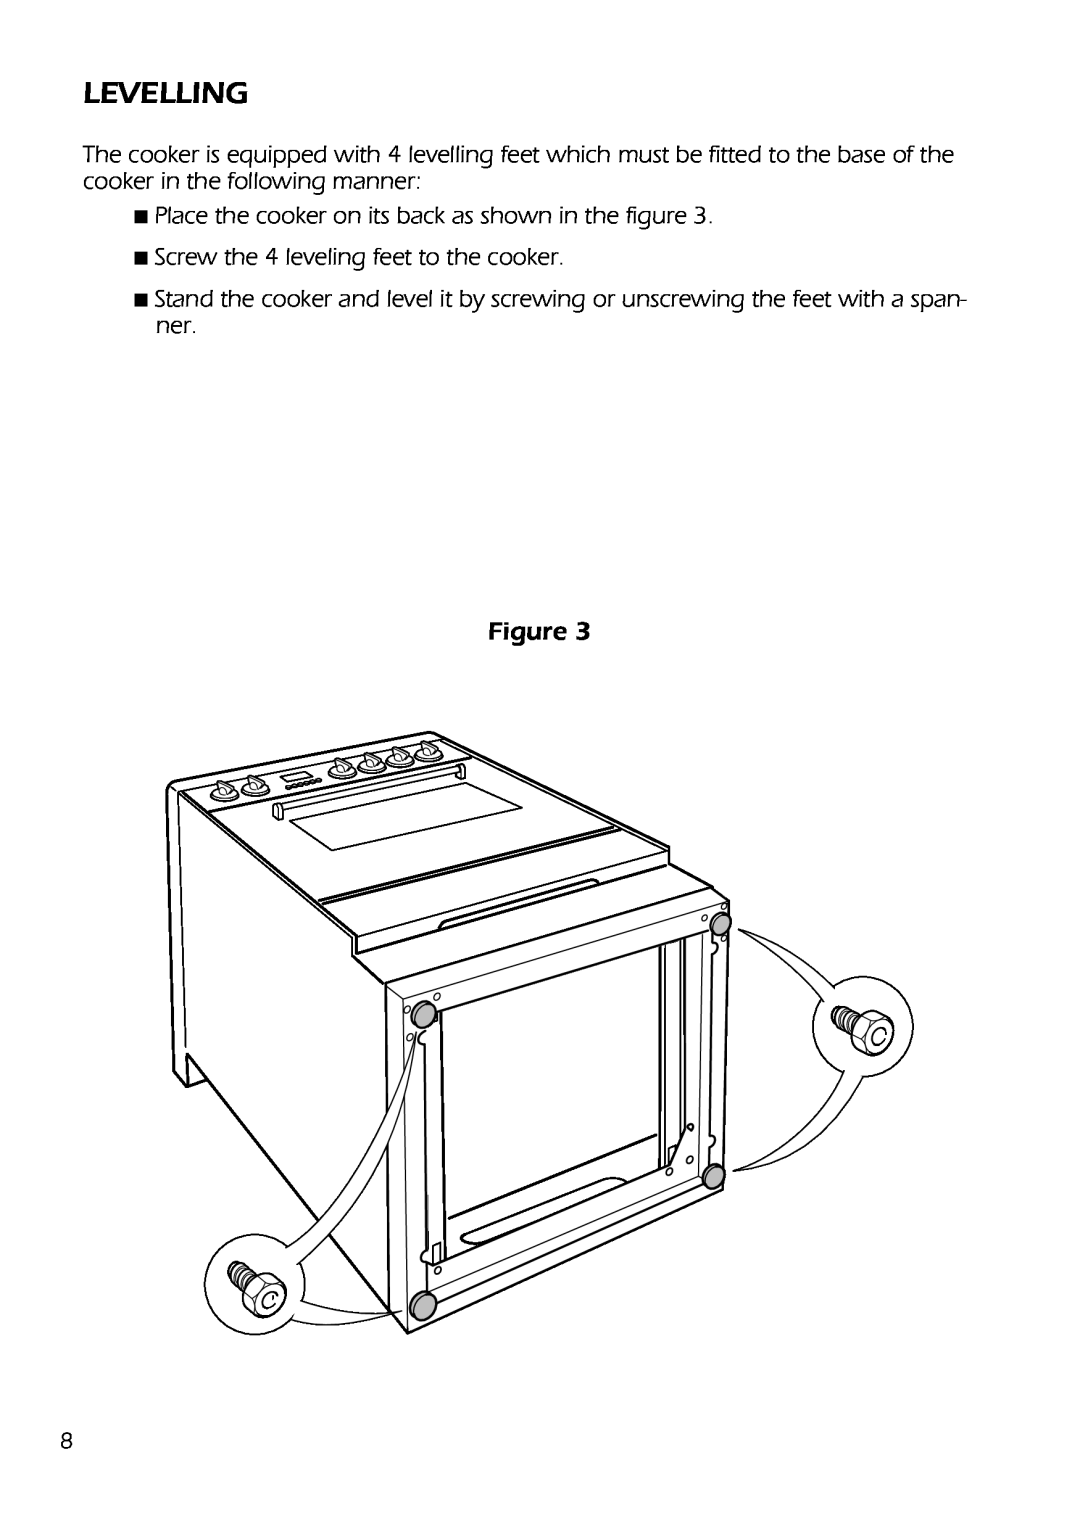 DeLonghi DS 61 GW Levelling, Place the cooker on its back as shown in the figure, Screw the 4 leveling feet to the cooker 